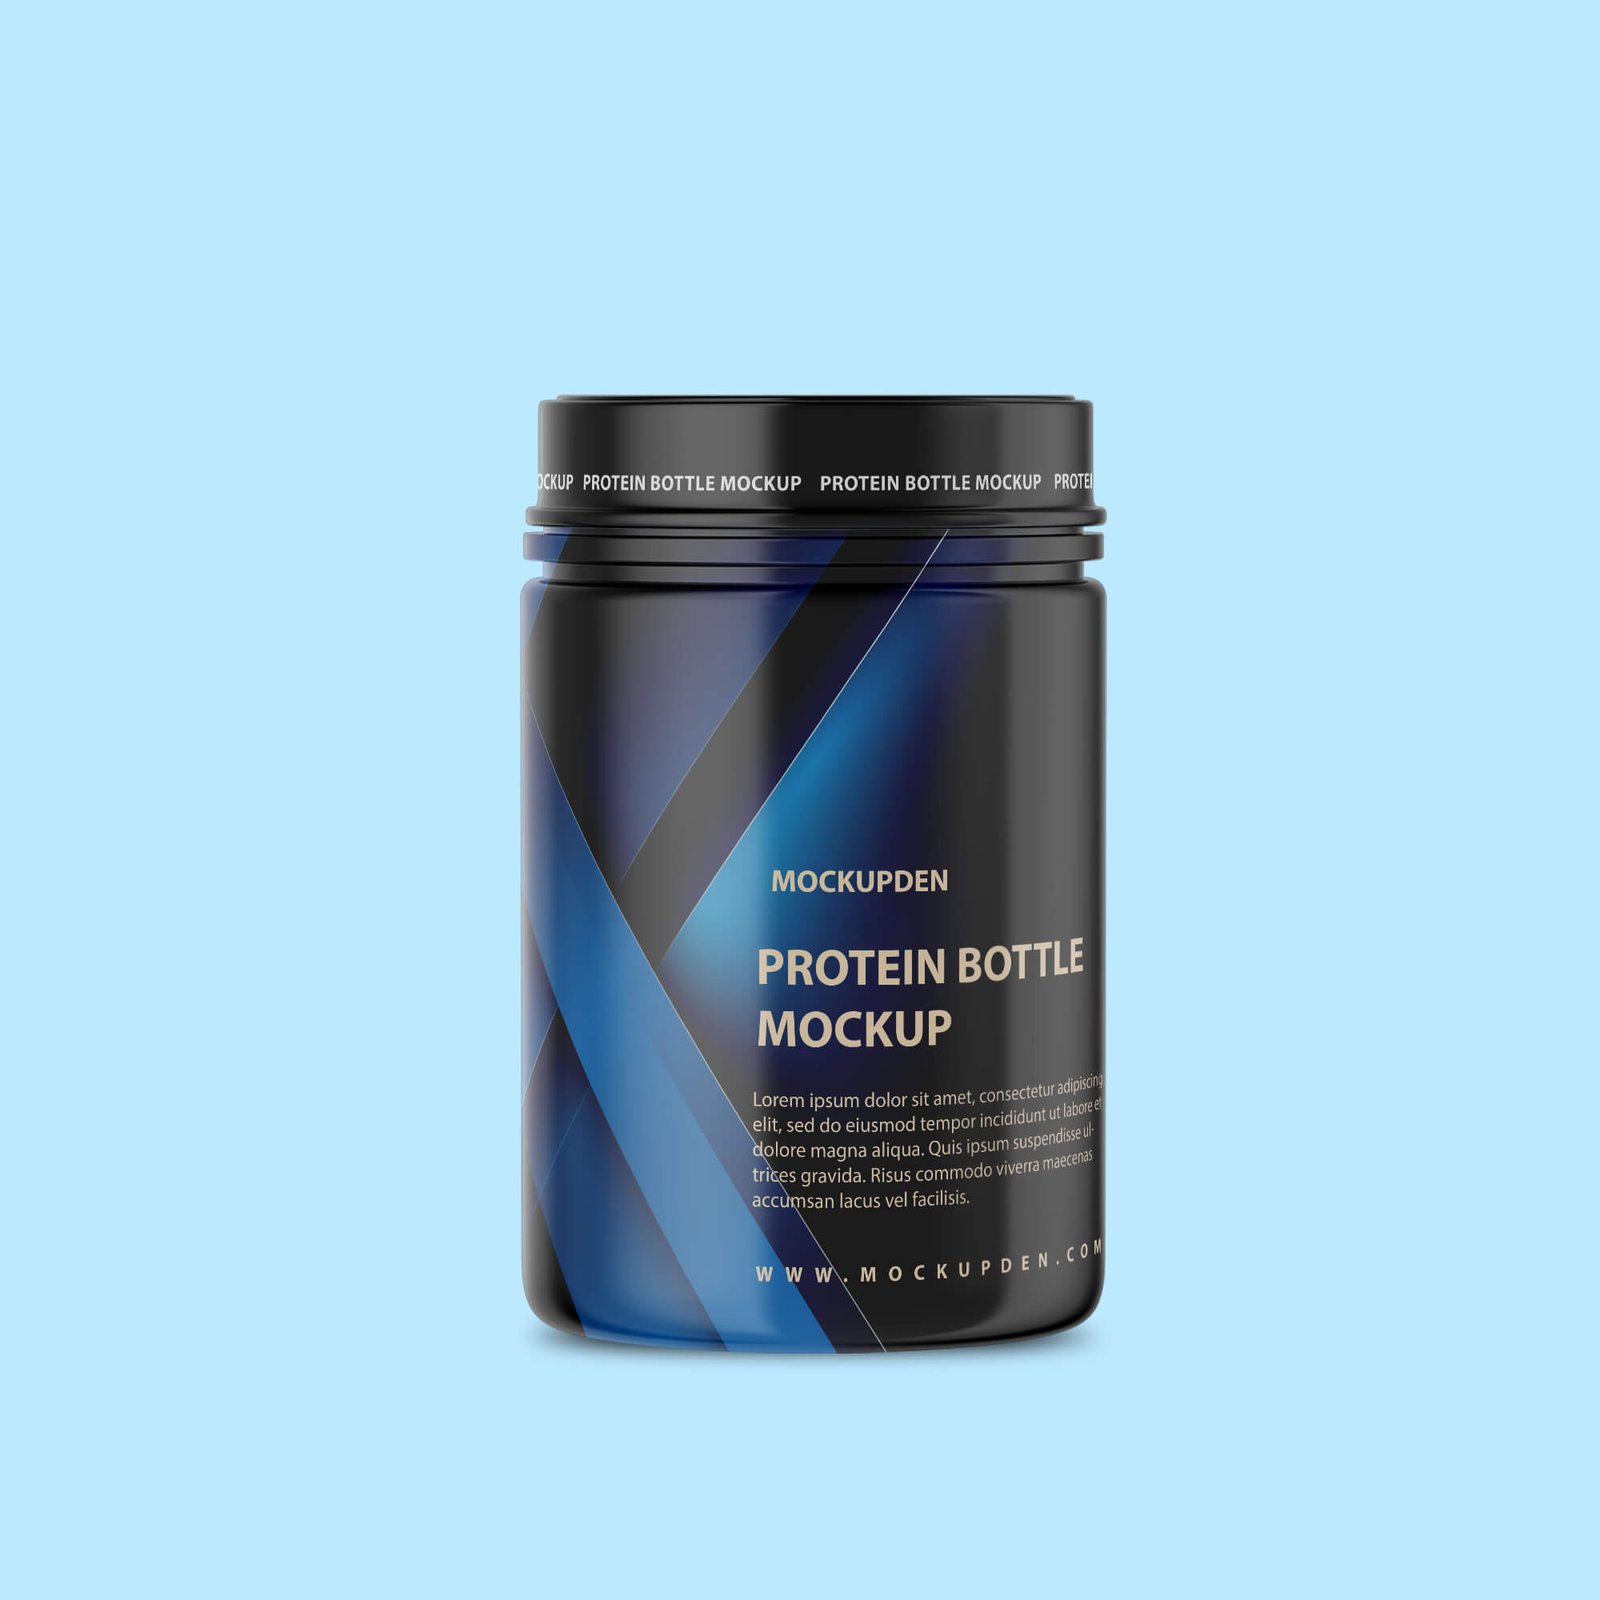 Design Free Protein Bottle Mockup PSD Template